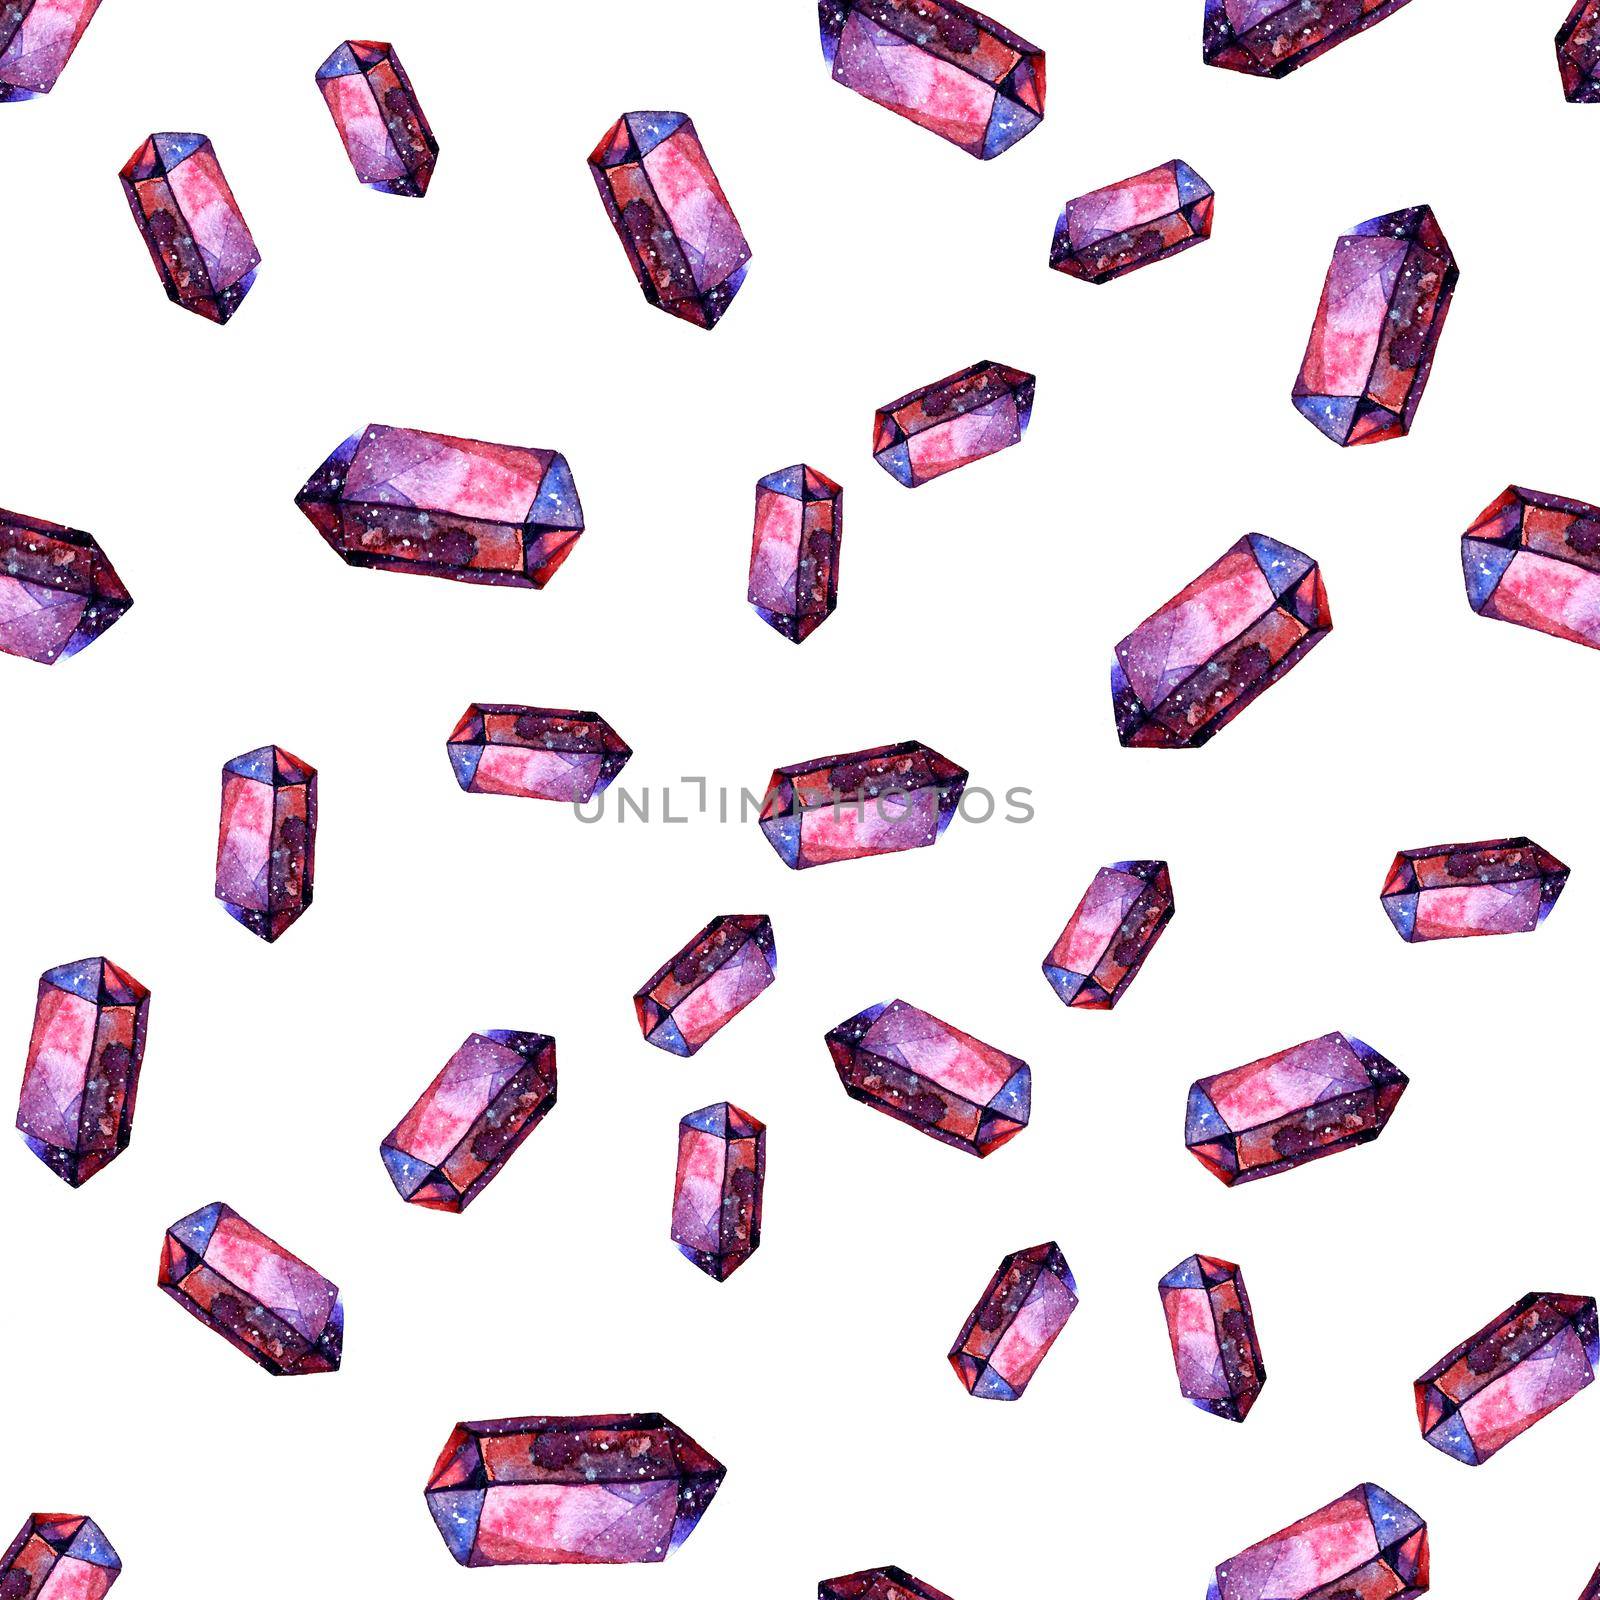 Watercolor illustration of diamond crystals - seamless pattern. Print for textile, fabric, wallpaper. Hand made painting. Jewel on white background. Unusual modern ornate design. by DesignAB